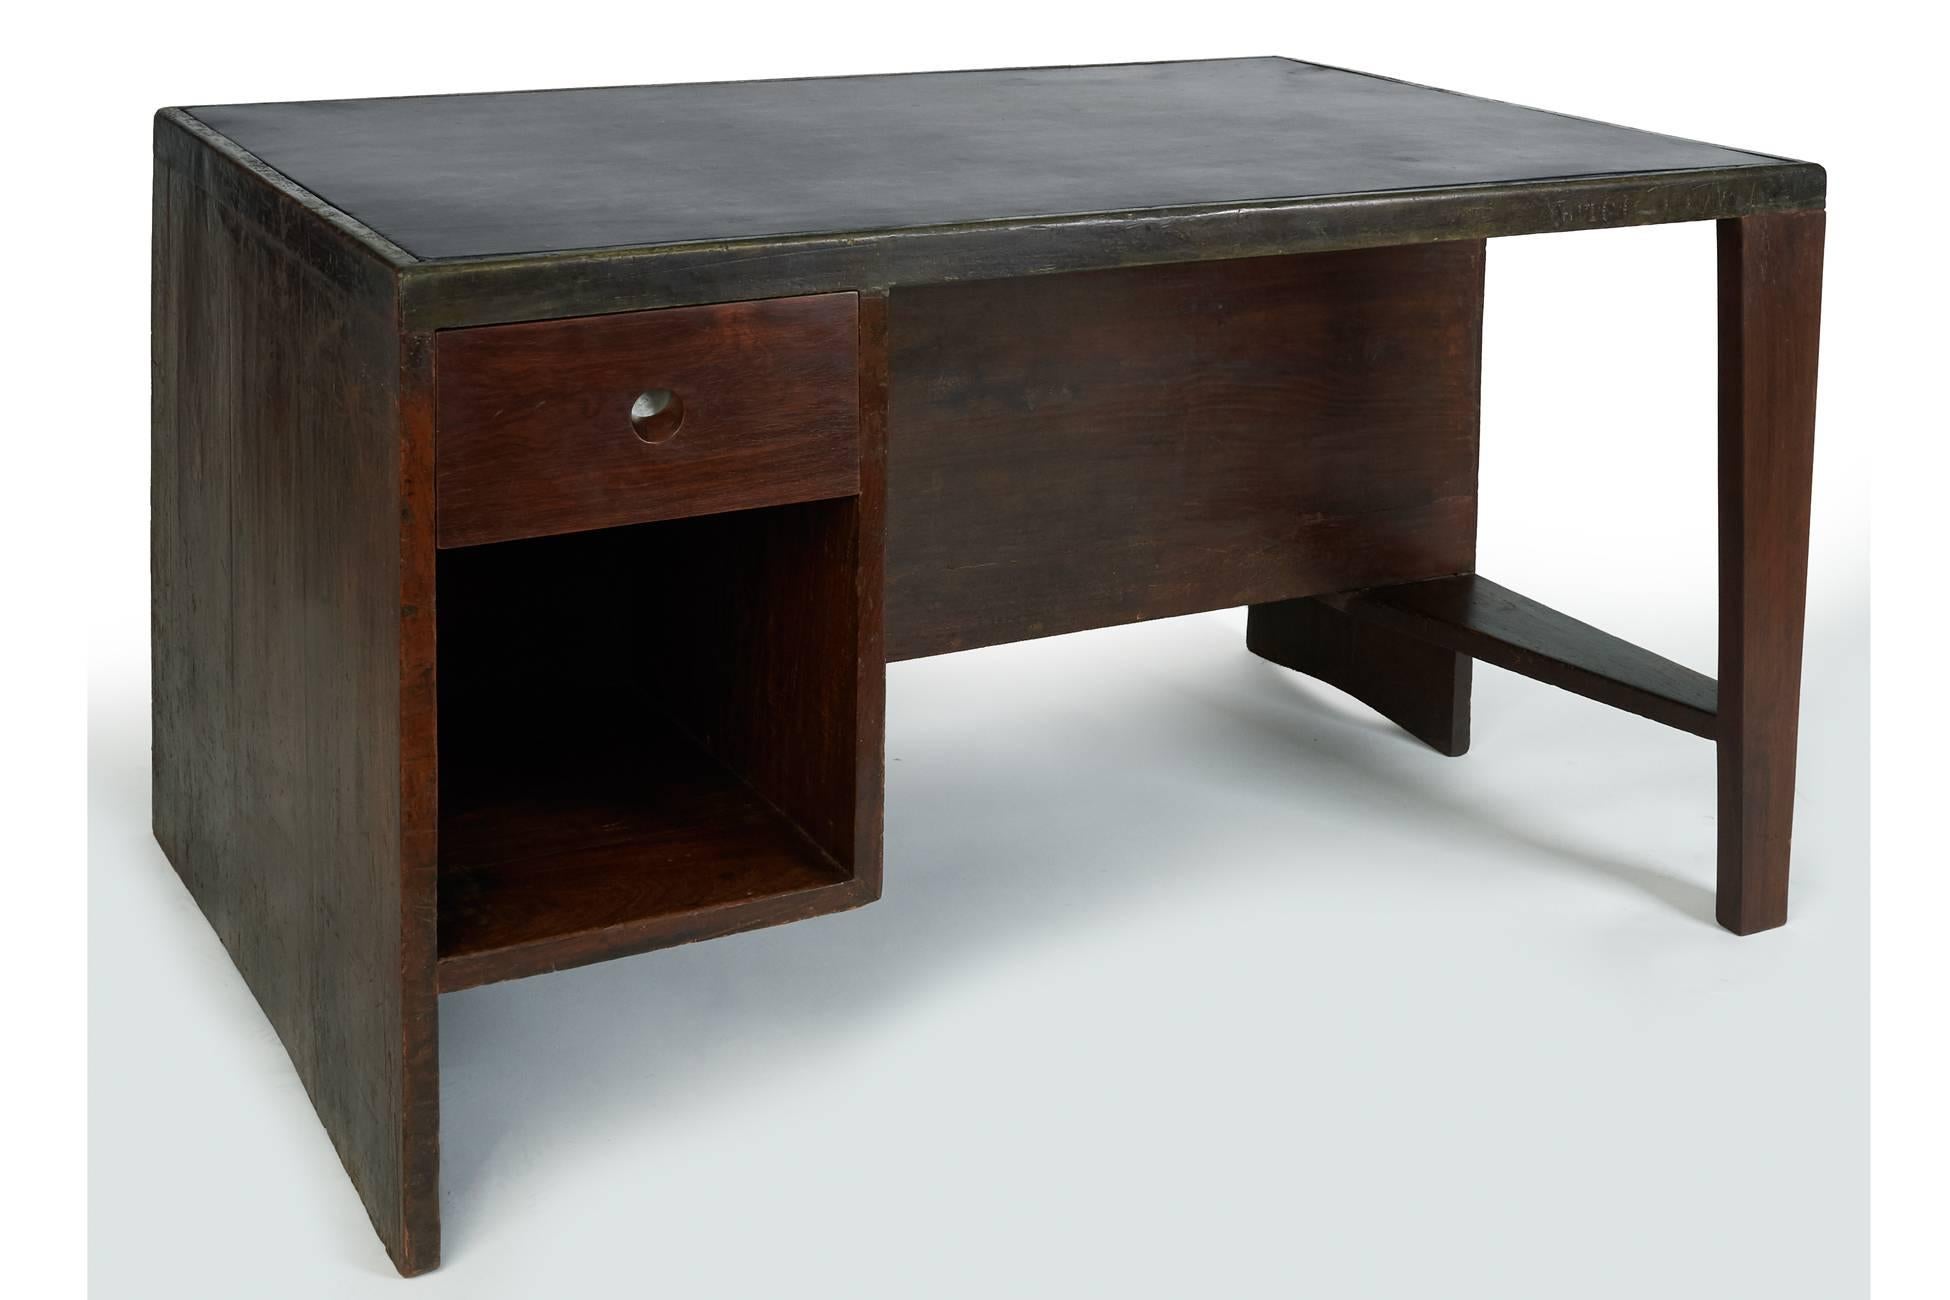 Pierre Jeanneret (1896–1967)

An exceptional floating desk with gracefully arched legs and a harmoniously integrated pigeonhole bookcase on the reverse, by Pierre Jeanneret for the Administrative Buildings in Chandigarh, India, designed by Le